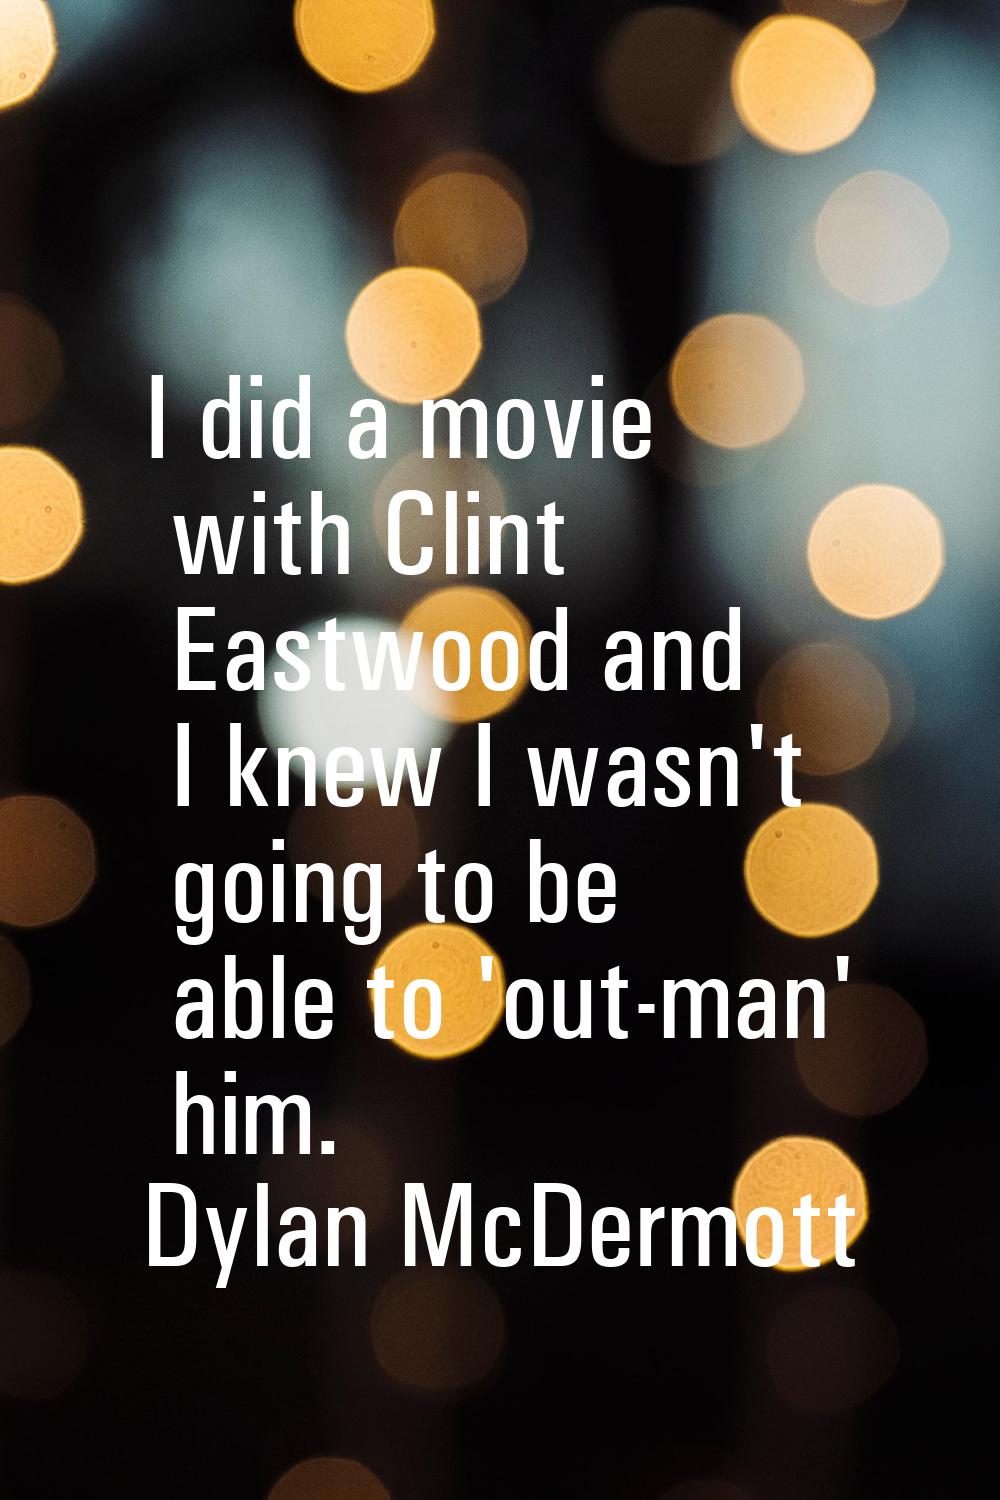 I did a movie with Clint Eastwood and I knew I wasn't going to be able to 'out-man' him.